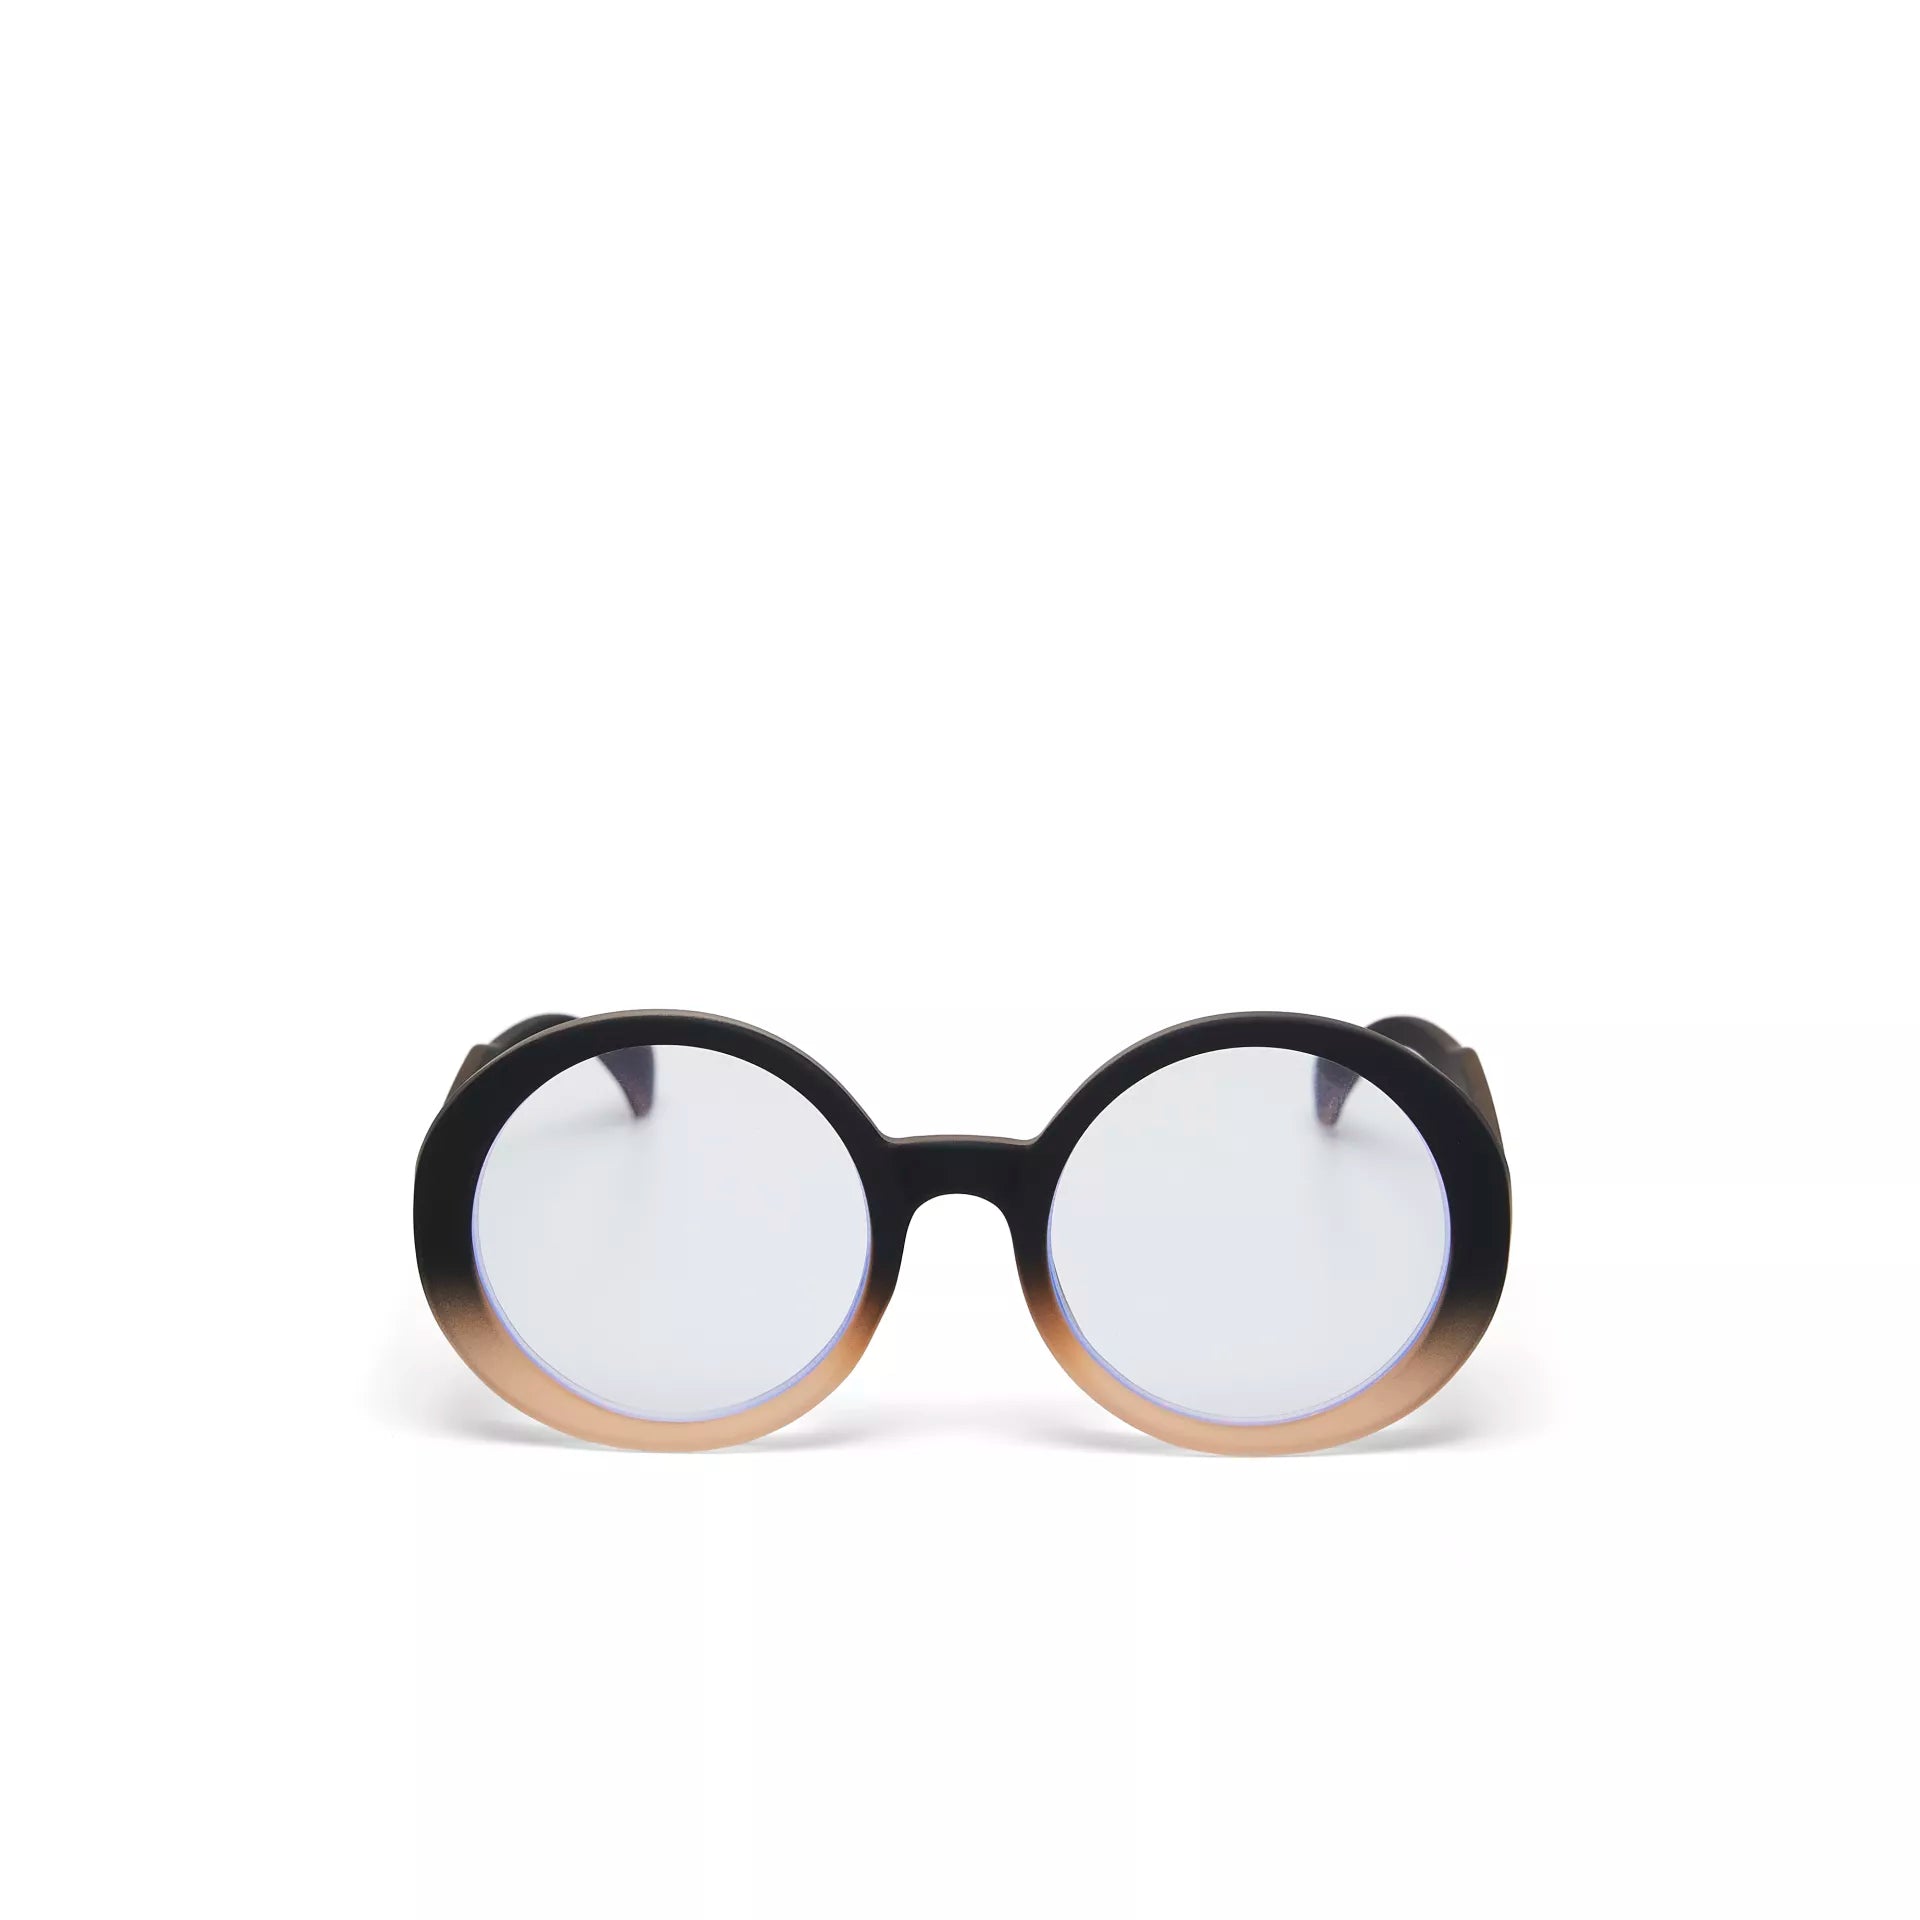 Fabulous Gifts Okkia Reading Glasses Tondo Black Rose 2.00 by Weirs of Baggot Street